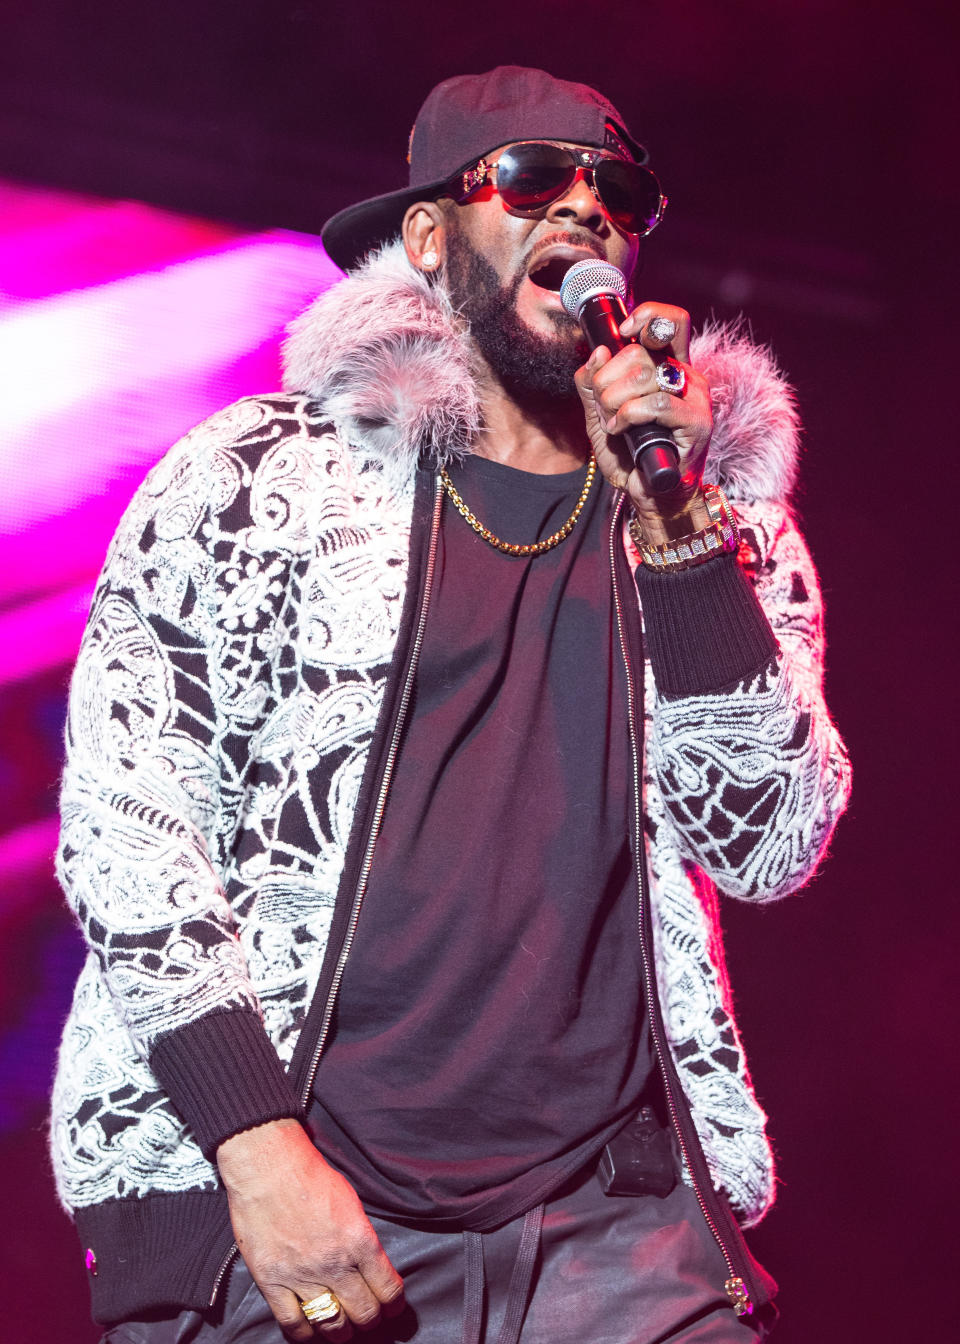 R Kelly stands accused of infecting a woman with an STD. (Getty)